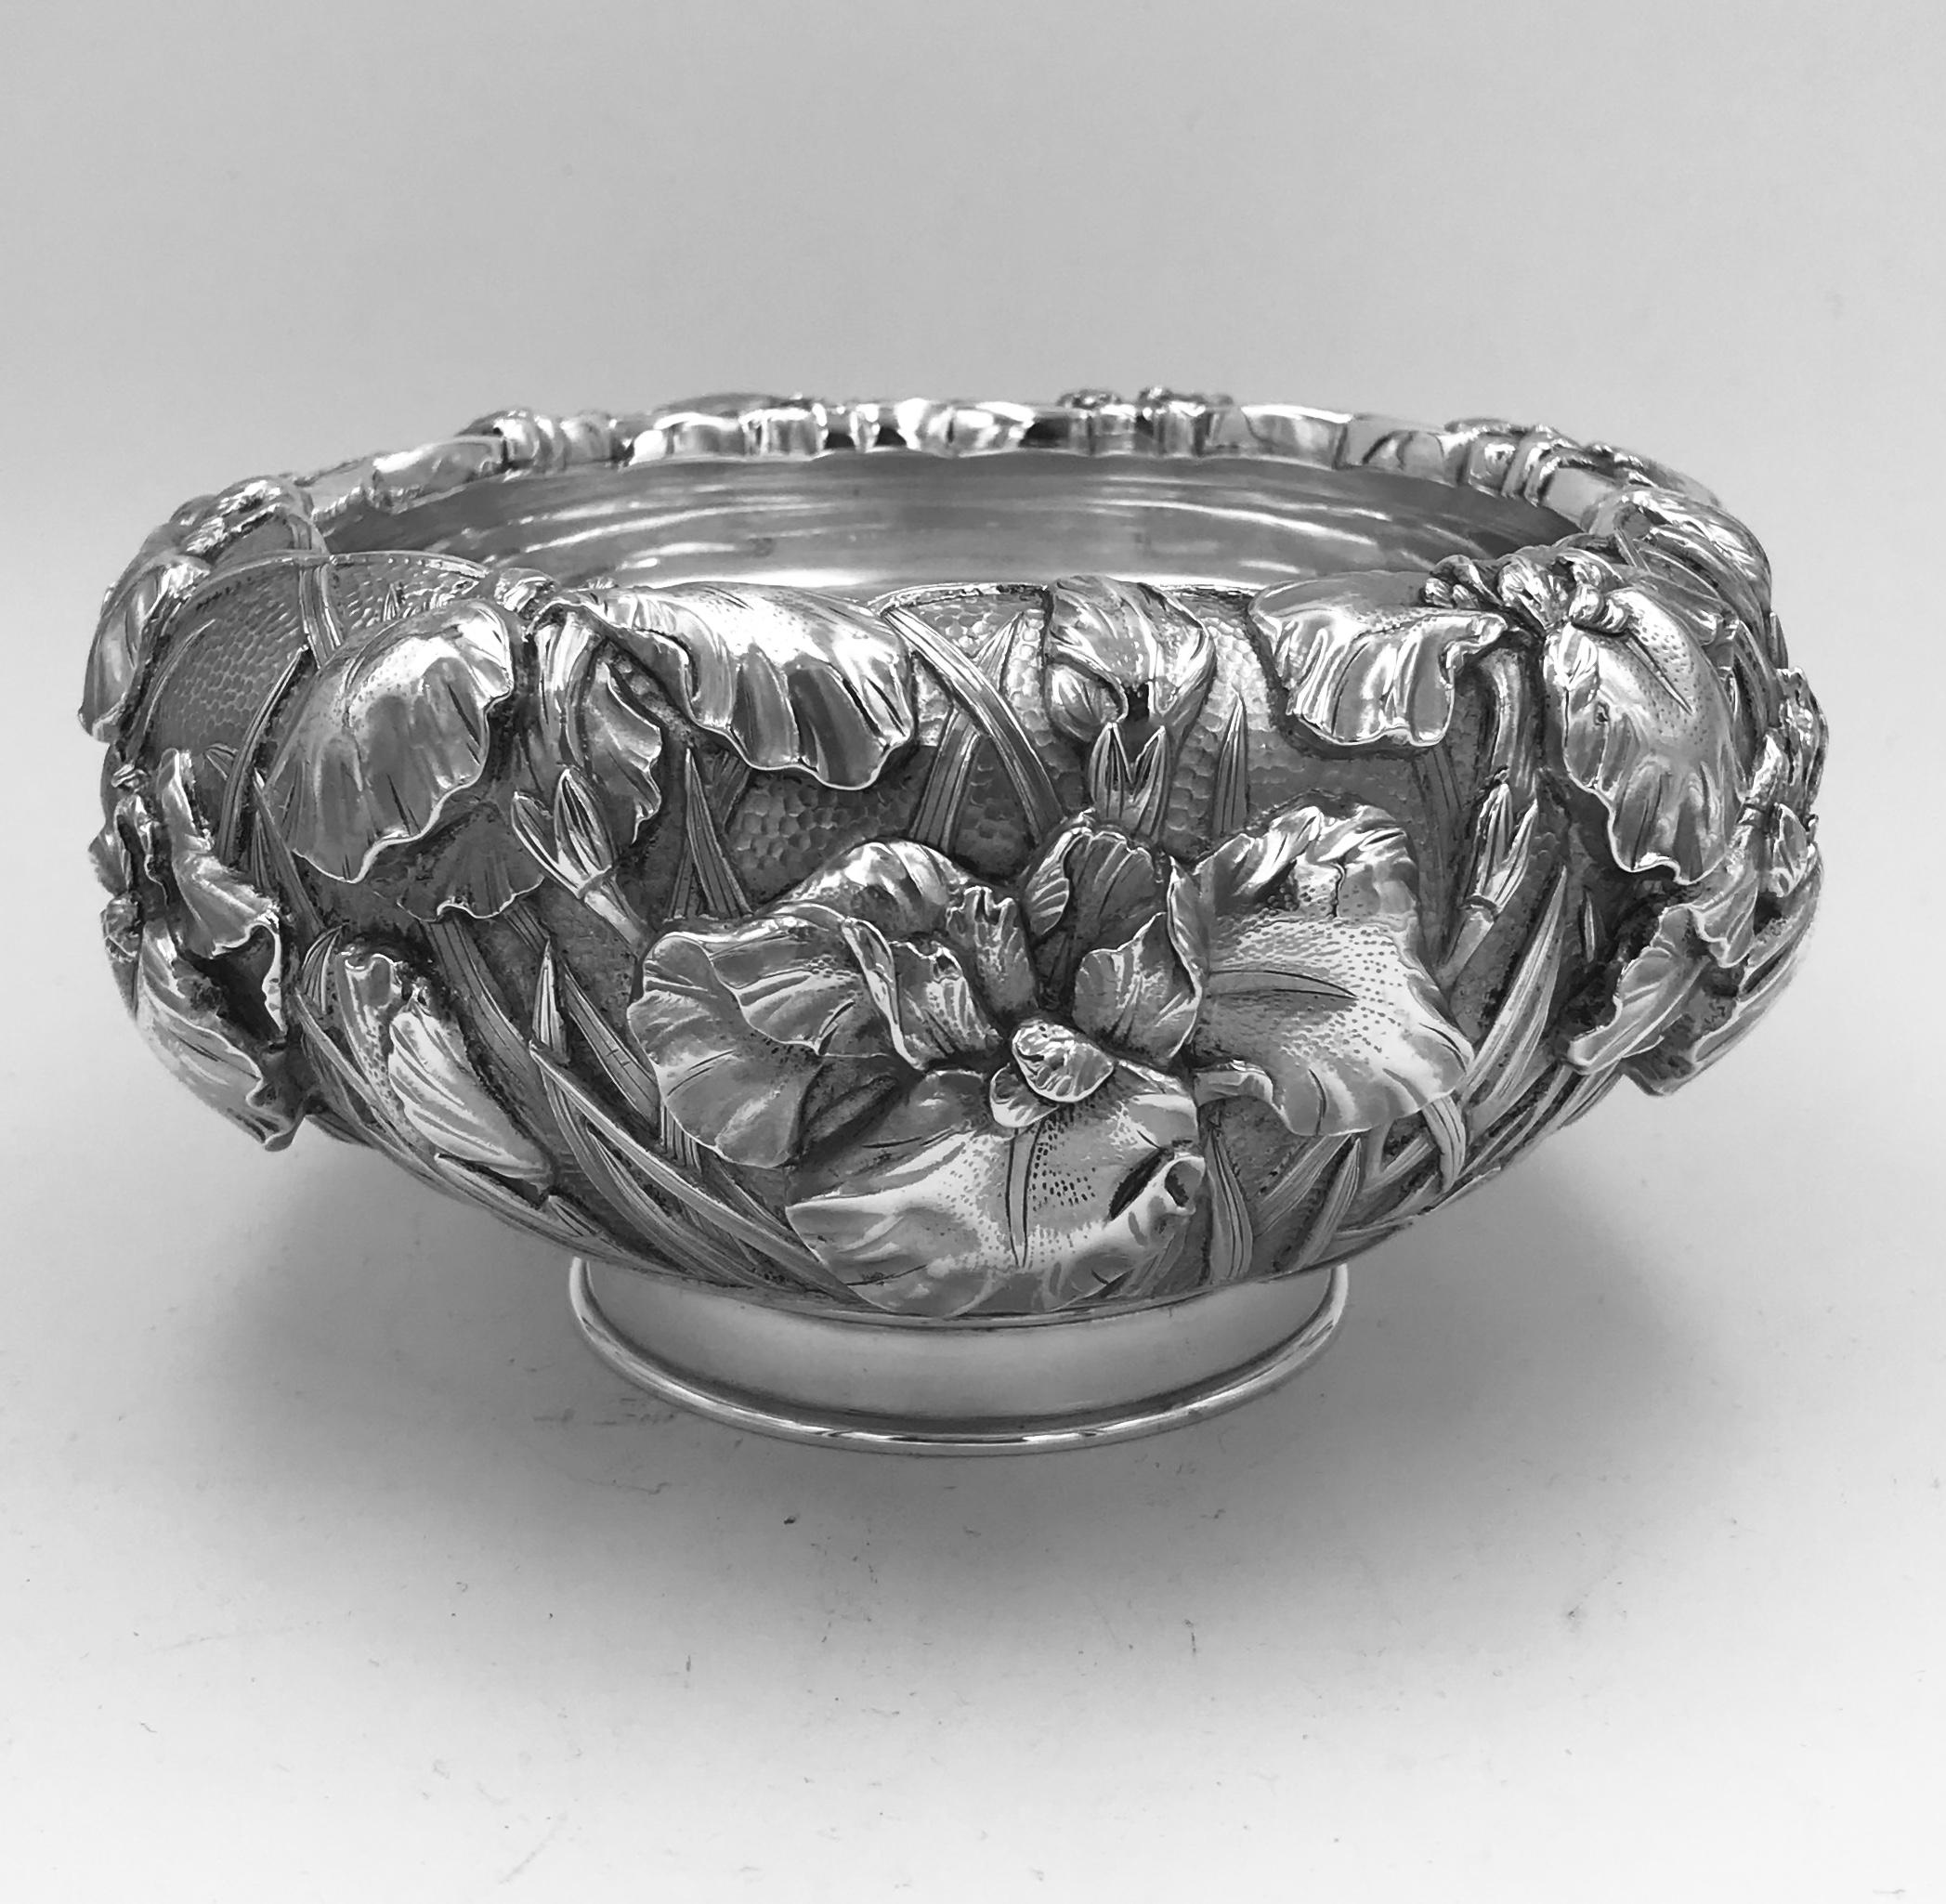 A Meiji period Japanese silver bowl with extremely detailed iris decoration and of typical double-skin form. The bowl dates form circa 1895 and was made by Katsuzo Mune, and their mark appears on the underside of the base of the bowl alongside the